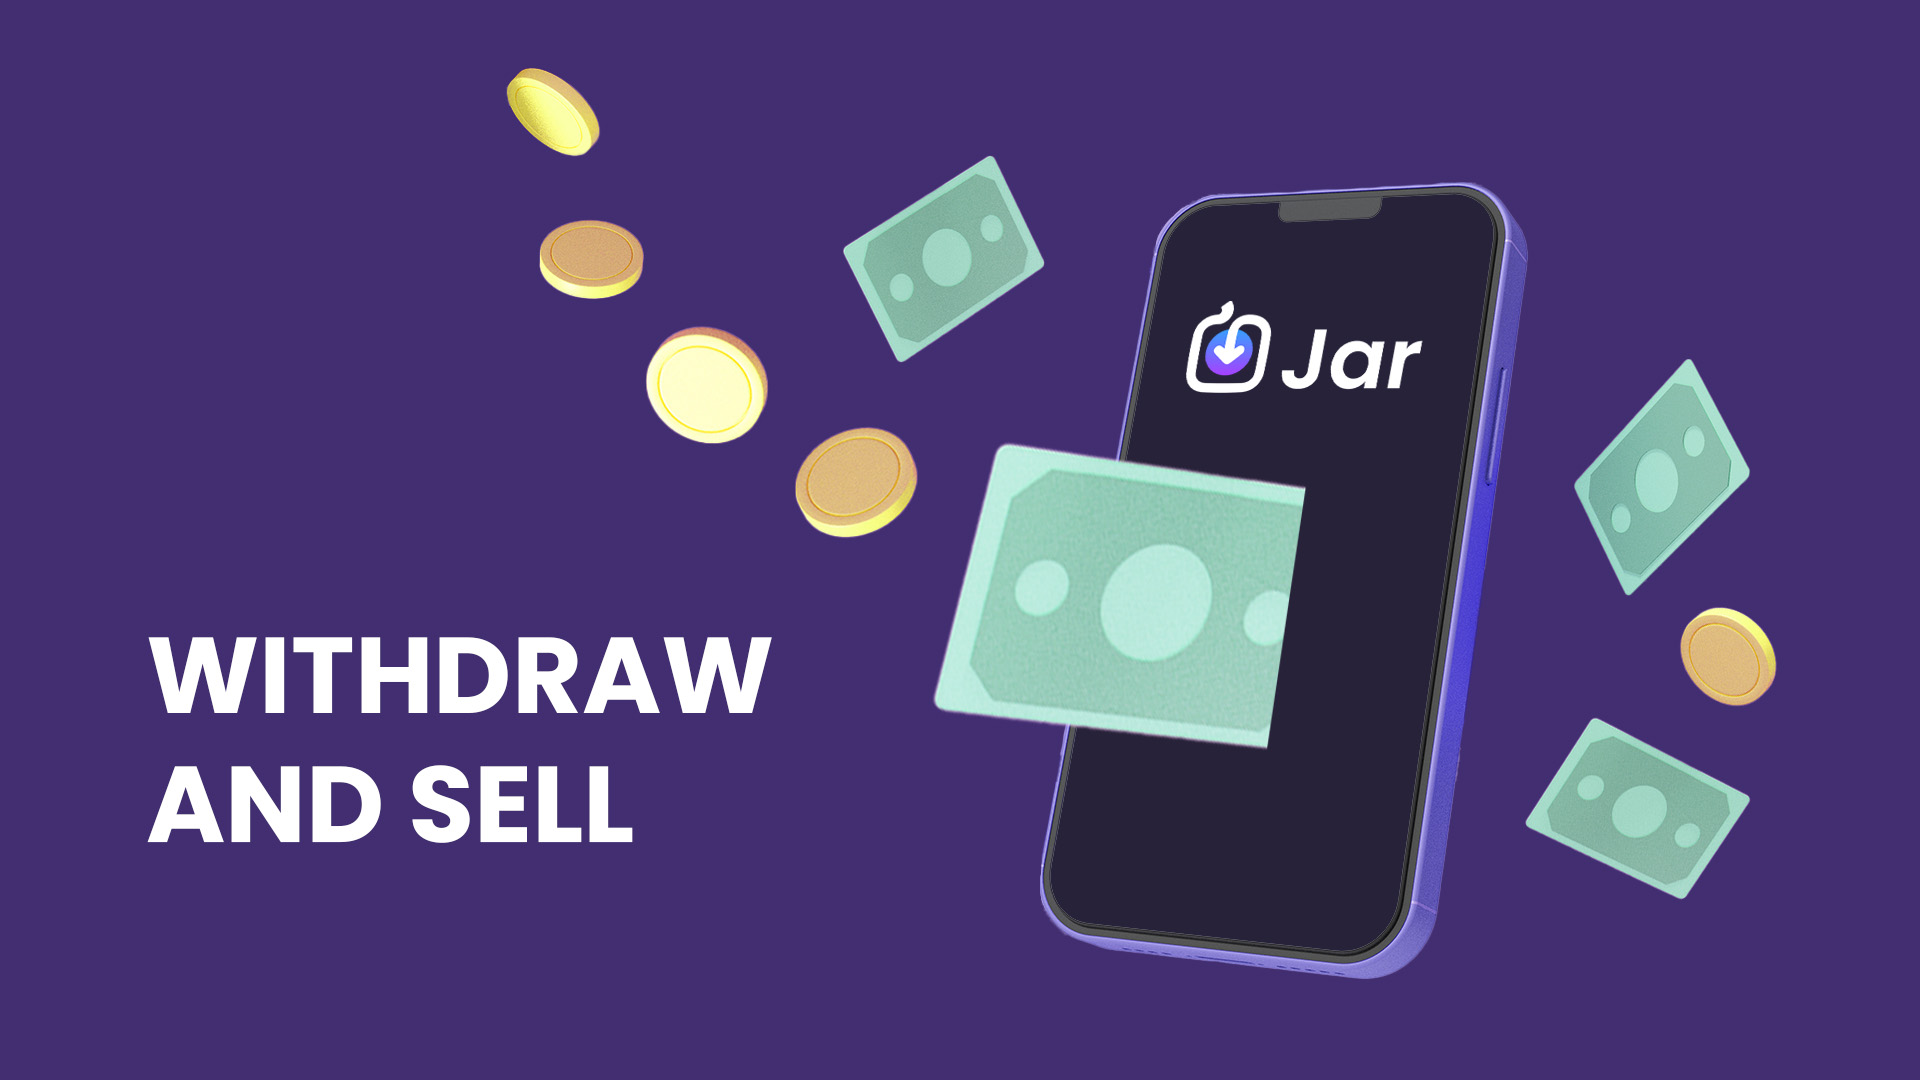 How to Withdraw Money from Jar App